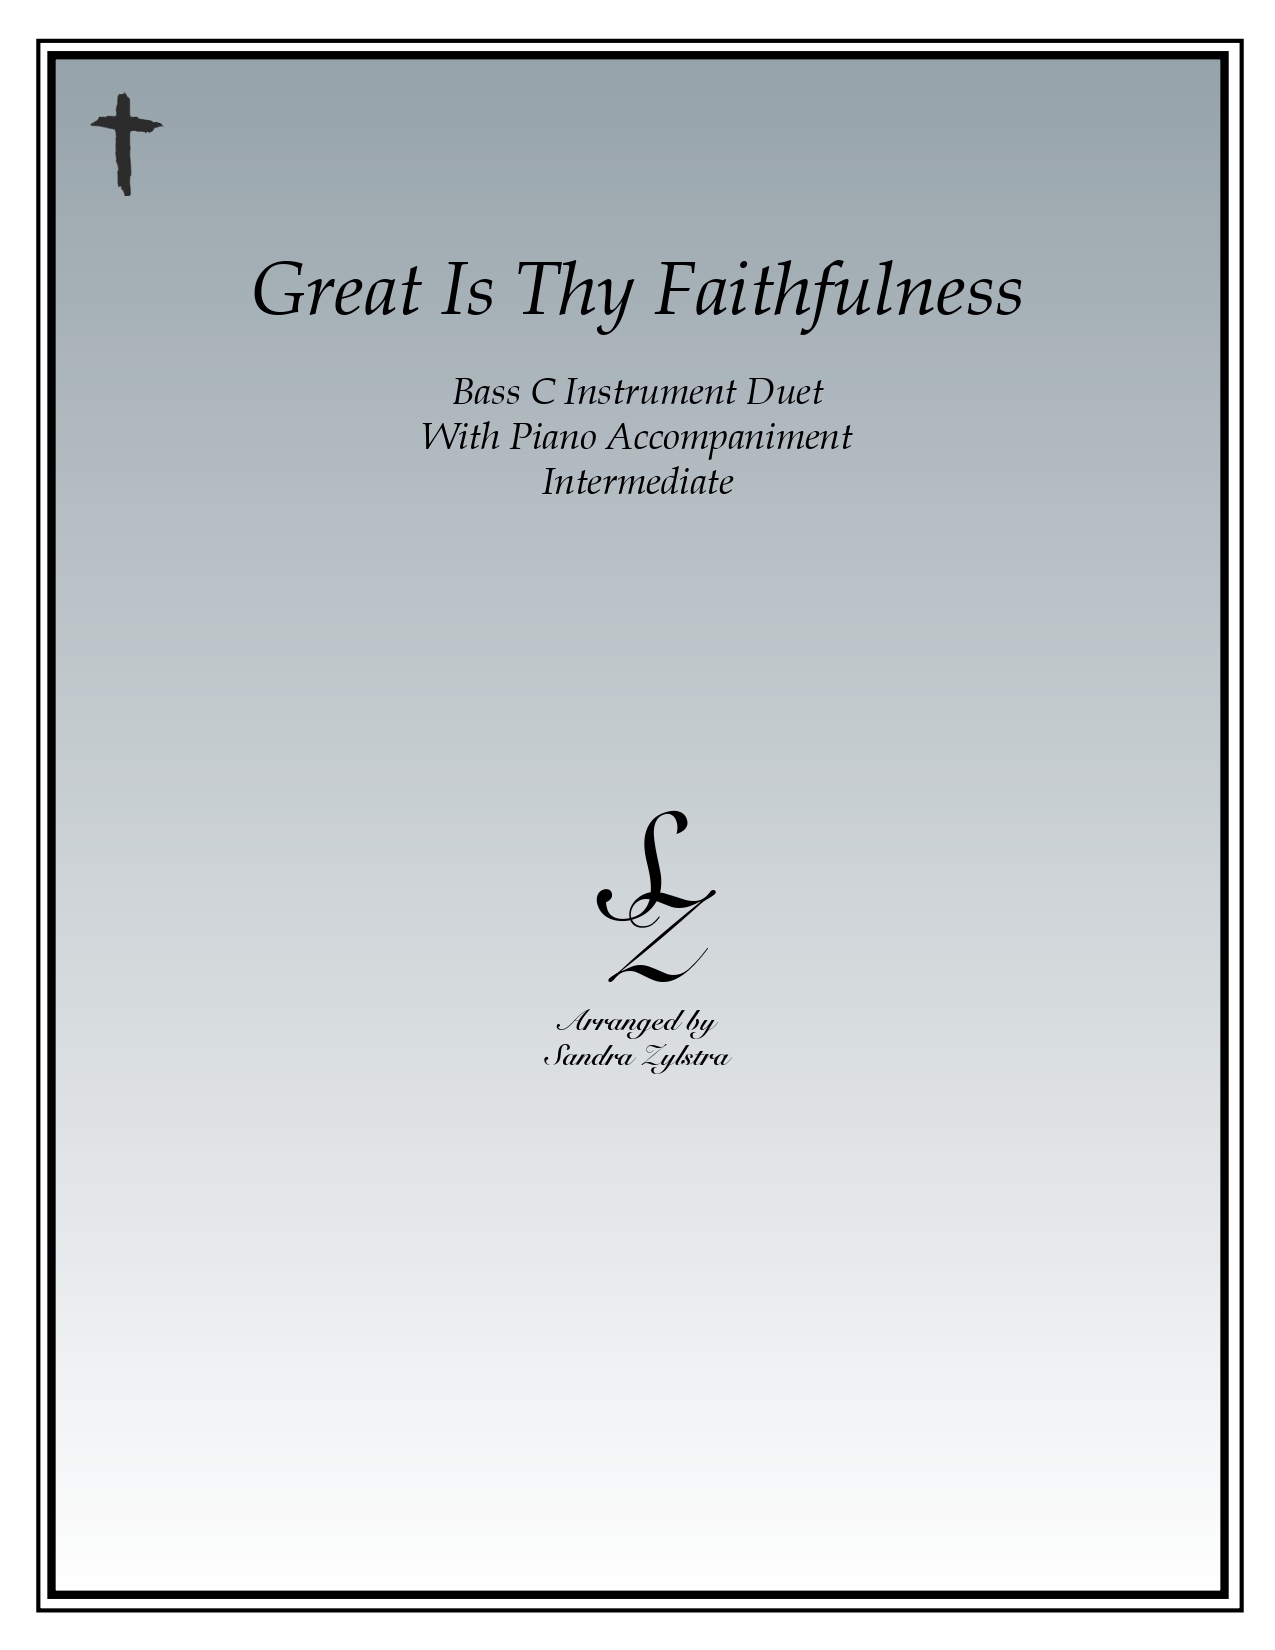 Great Is Thy Faithfulness bass C instrument duet part cover page 00011